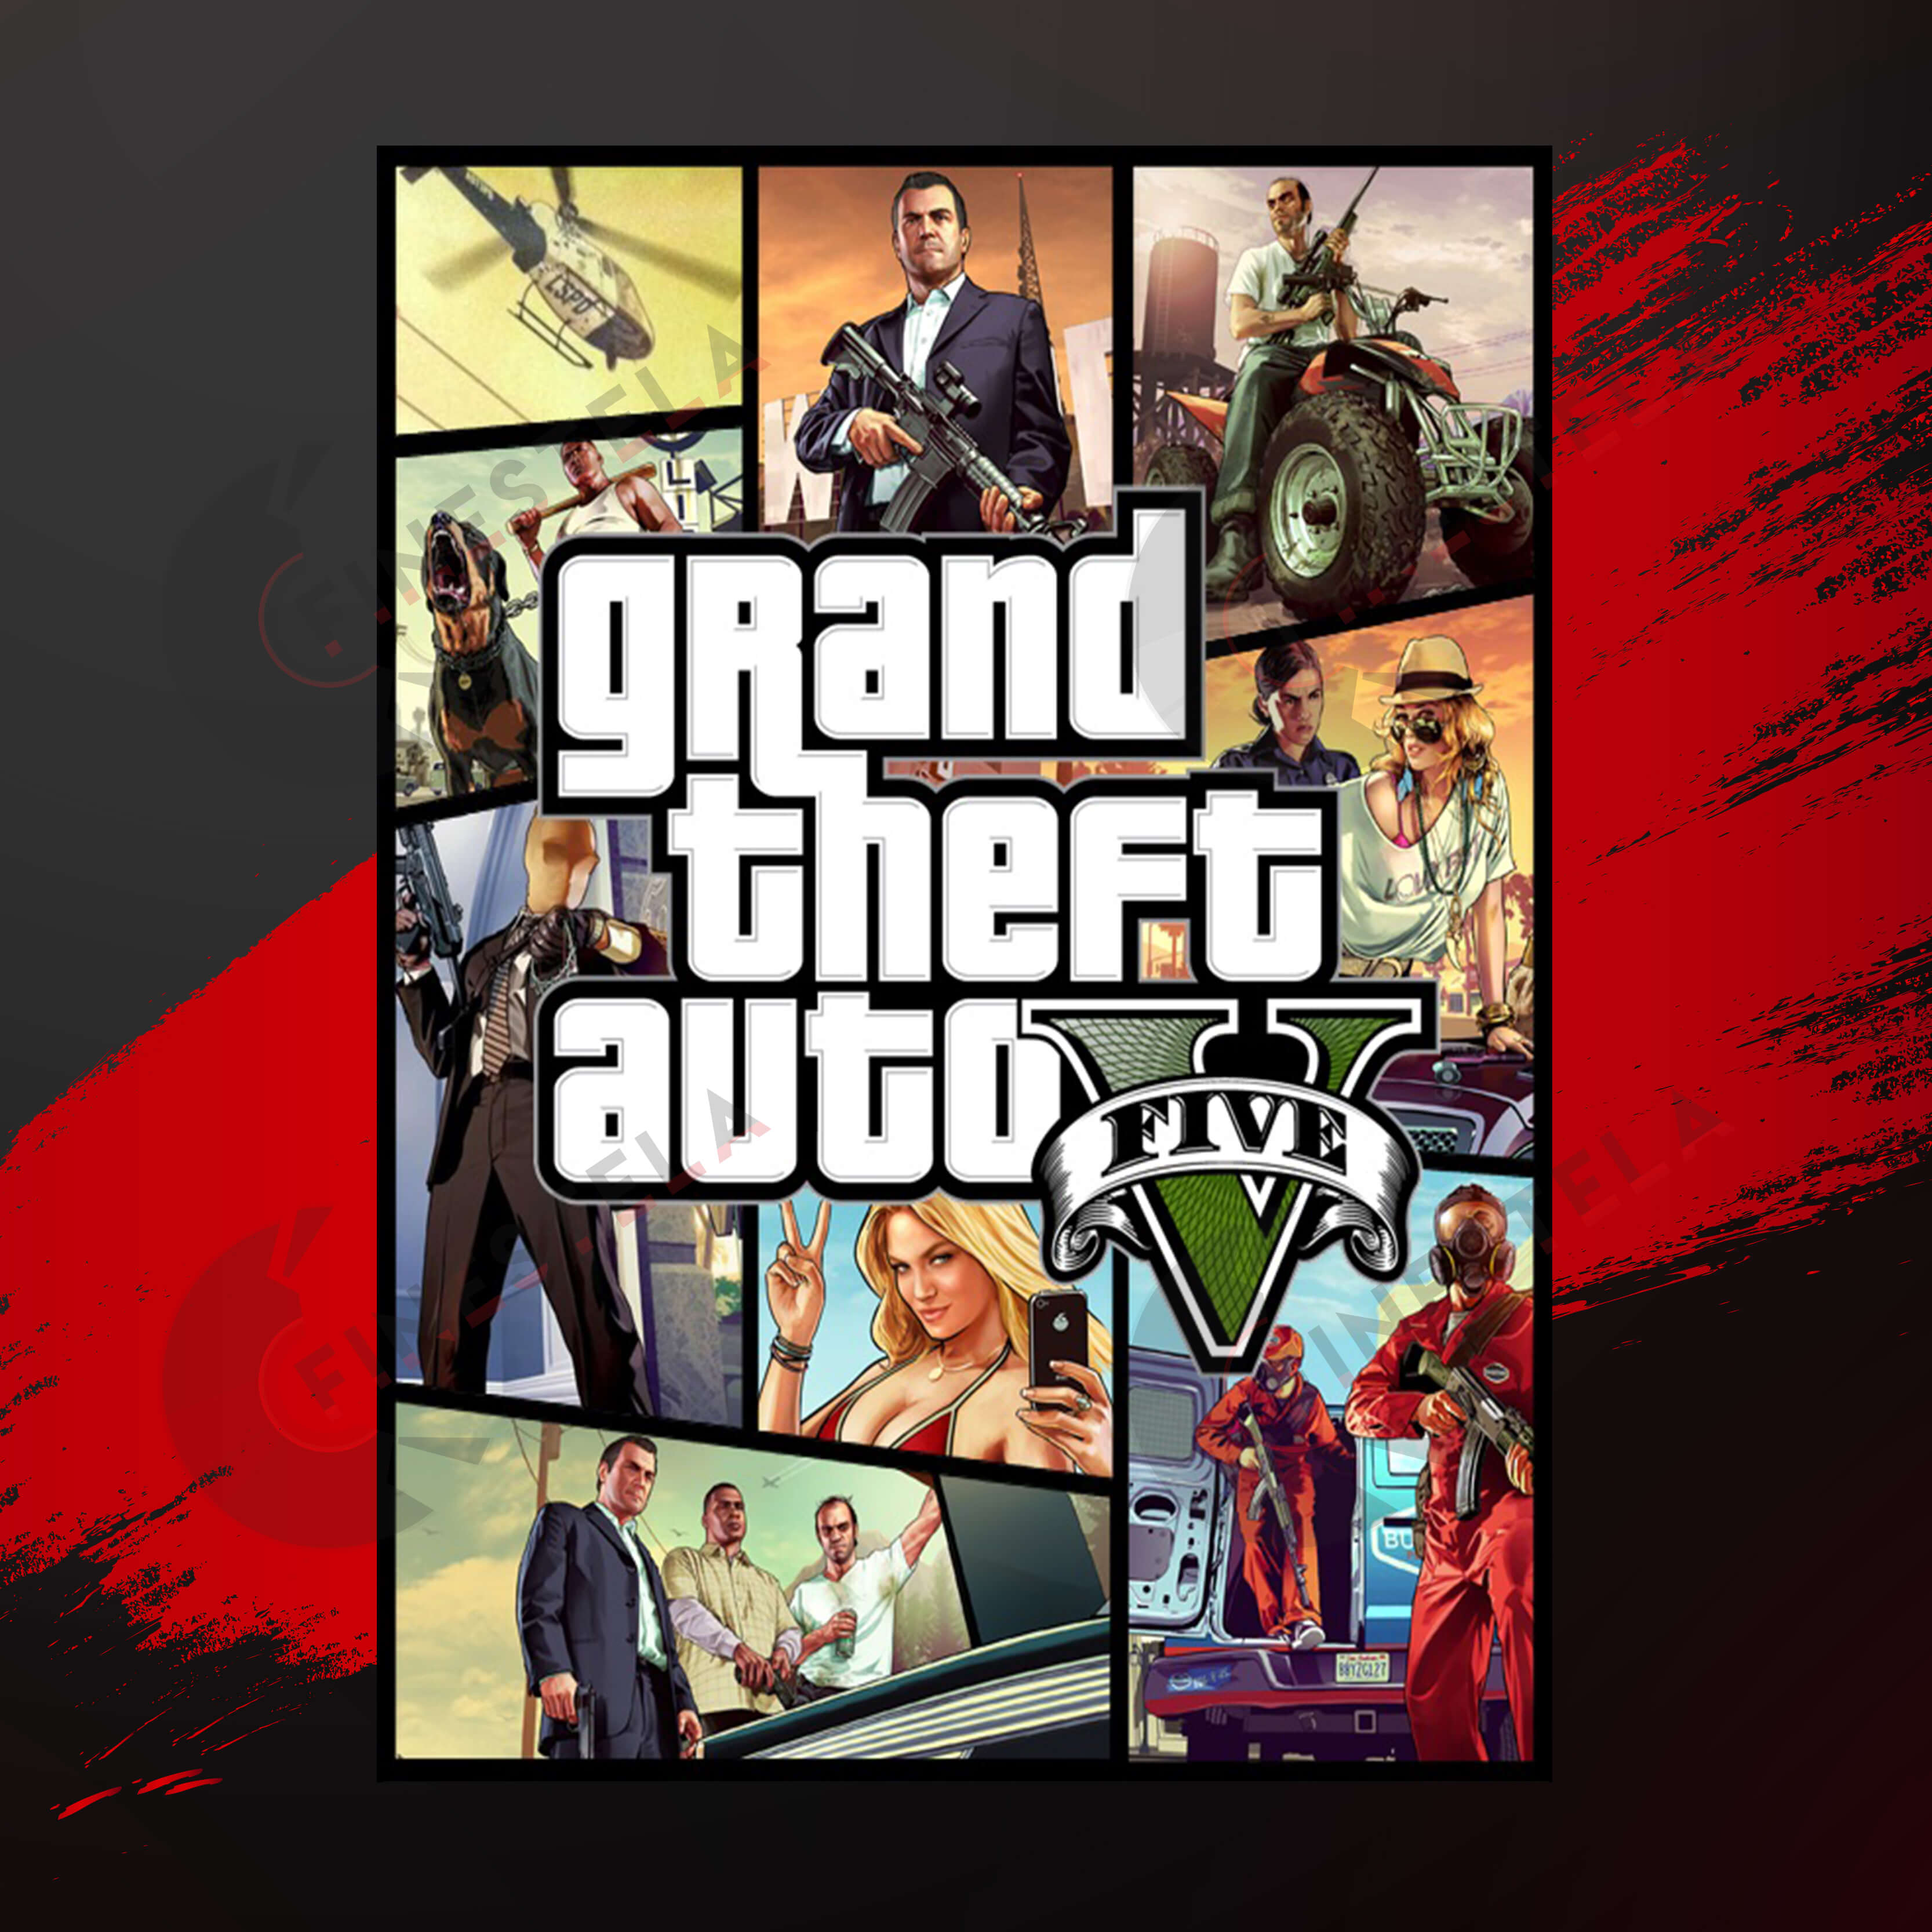 What price will gta 5 be фото 2